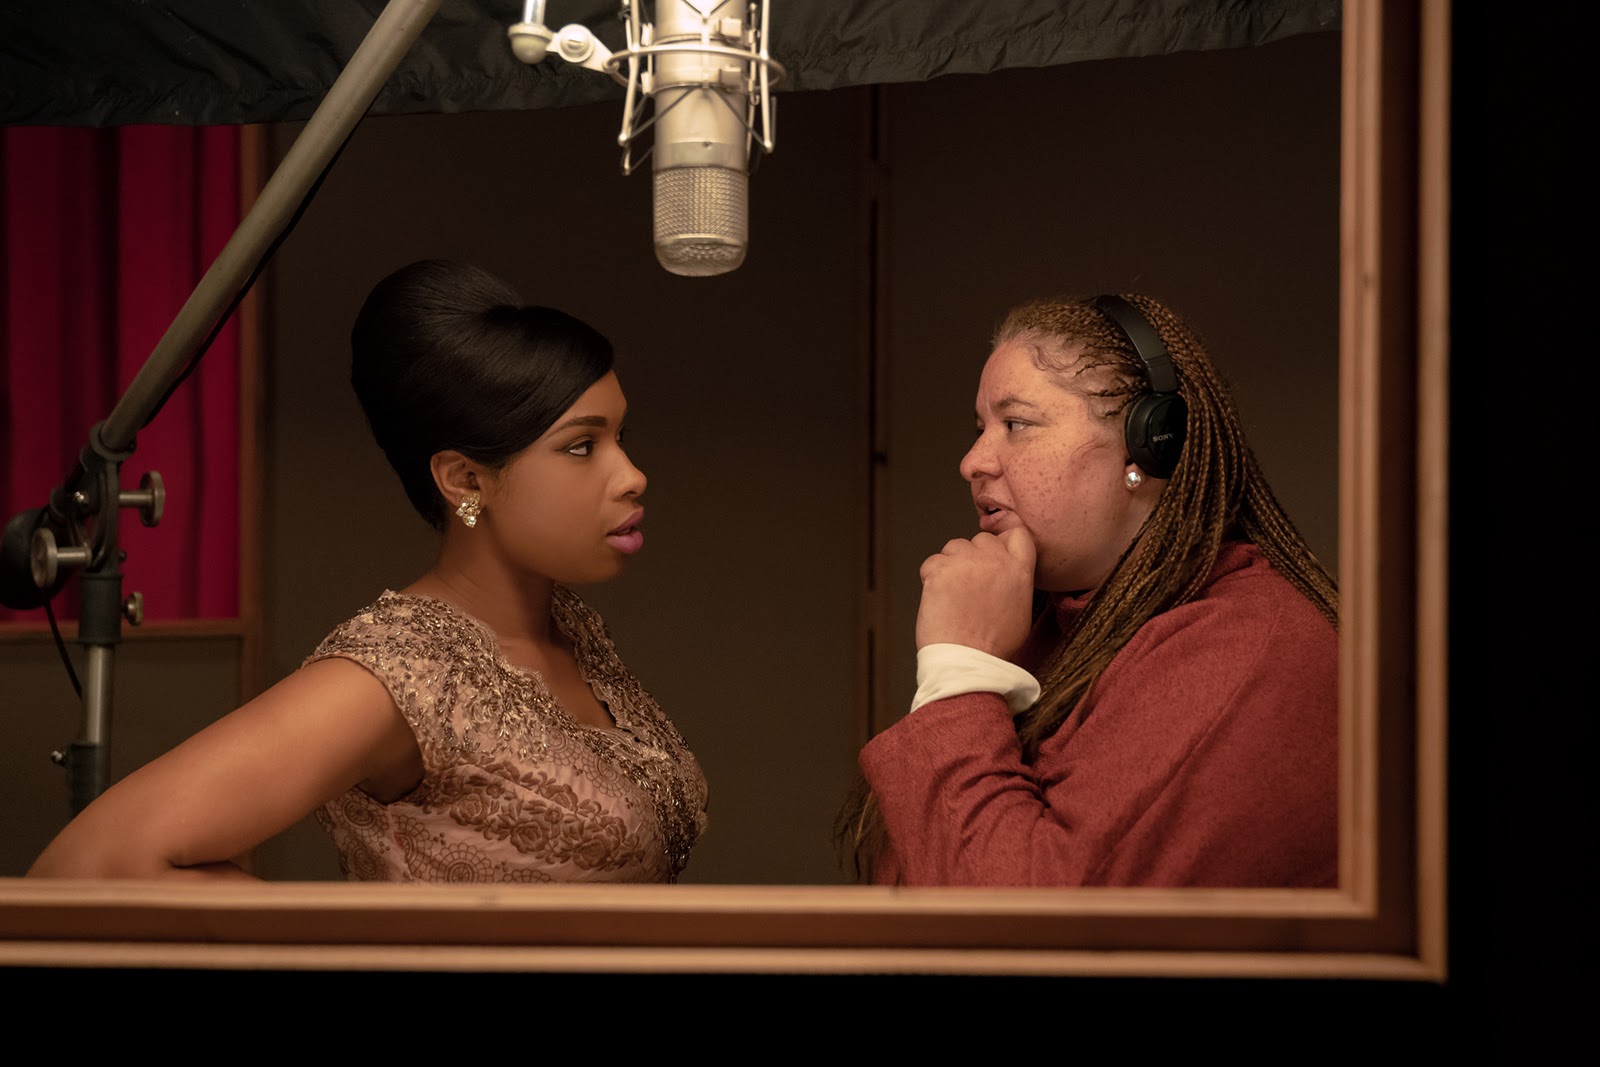 Jennifer Hudson gets some direction from Liesl Tommy in the soundbooth.